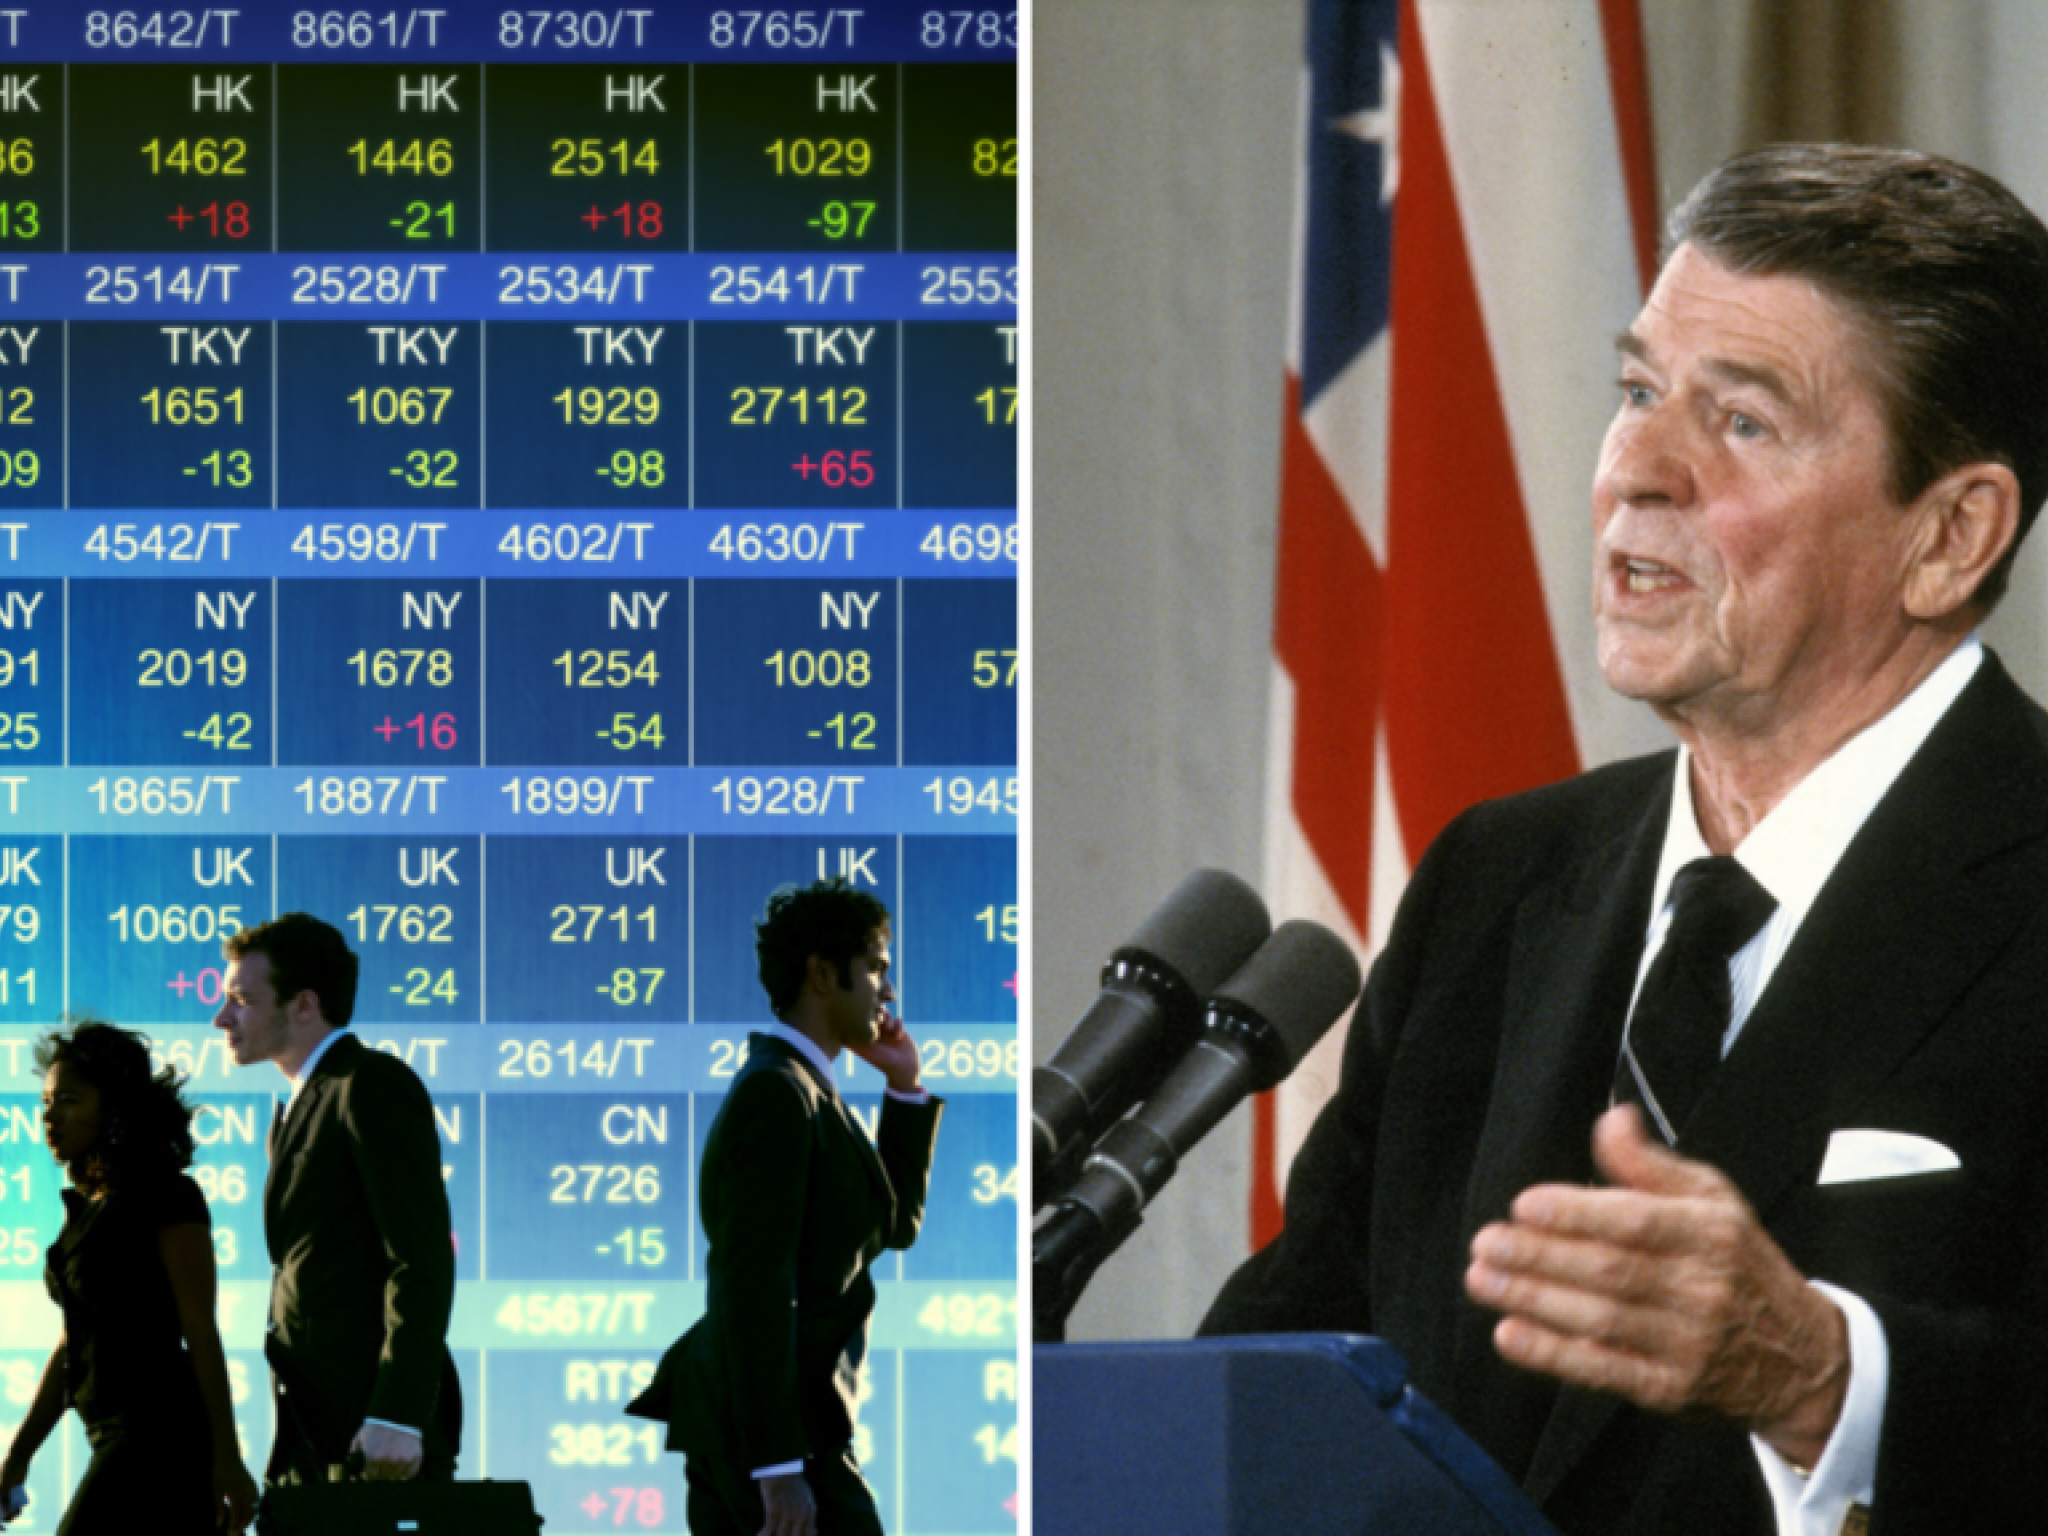  trump-shooting-recalls-memories-of-reagan-assassination-attempt-heres-how-markets-react-to-political-violence 